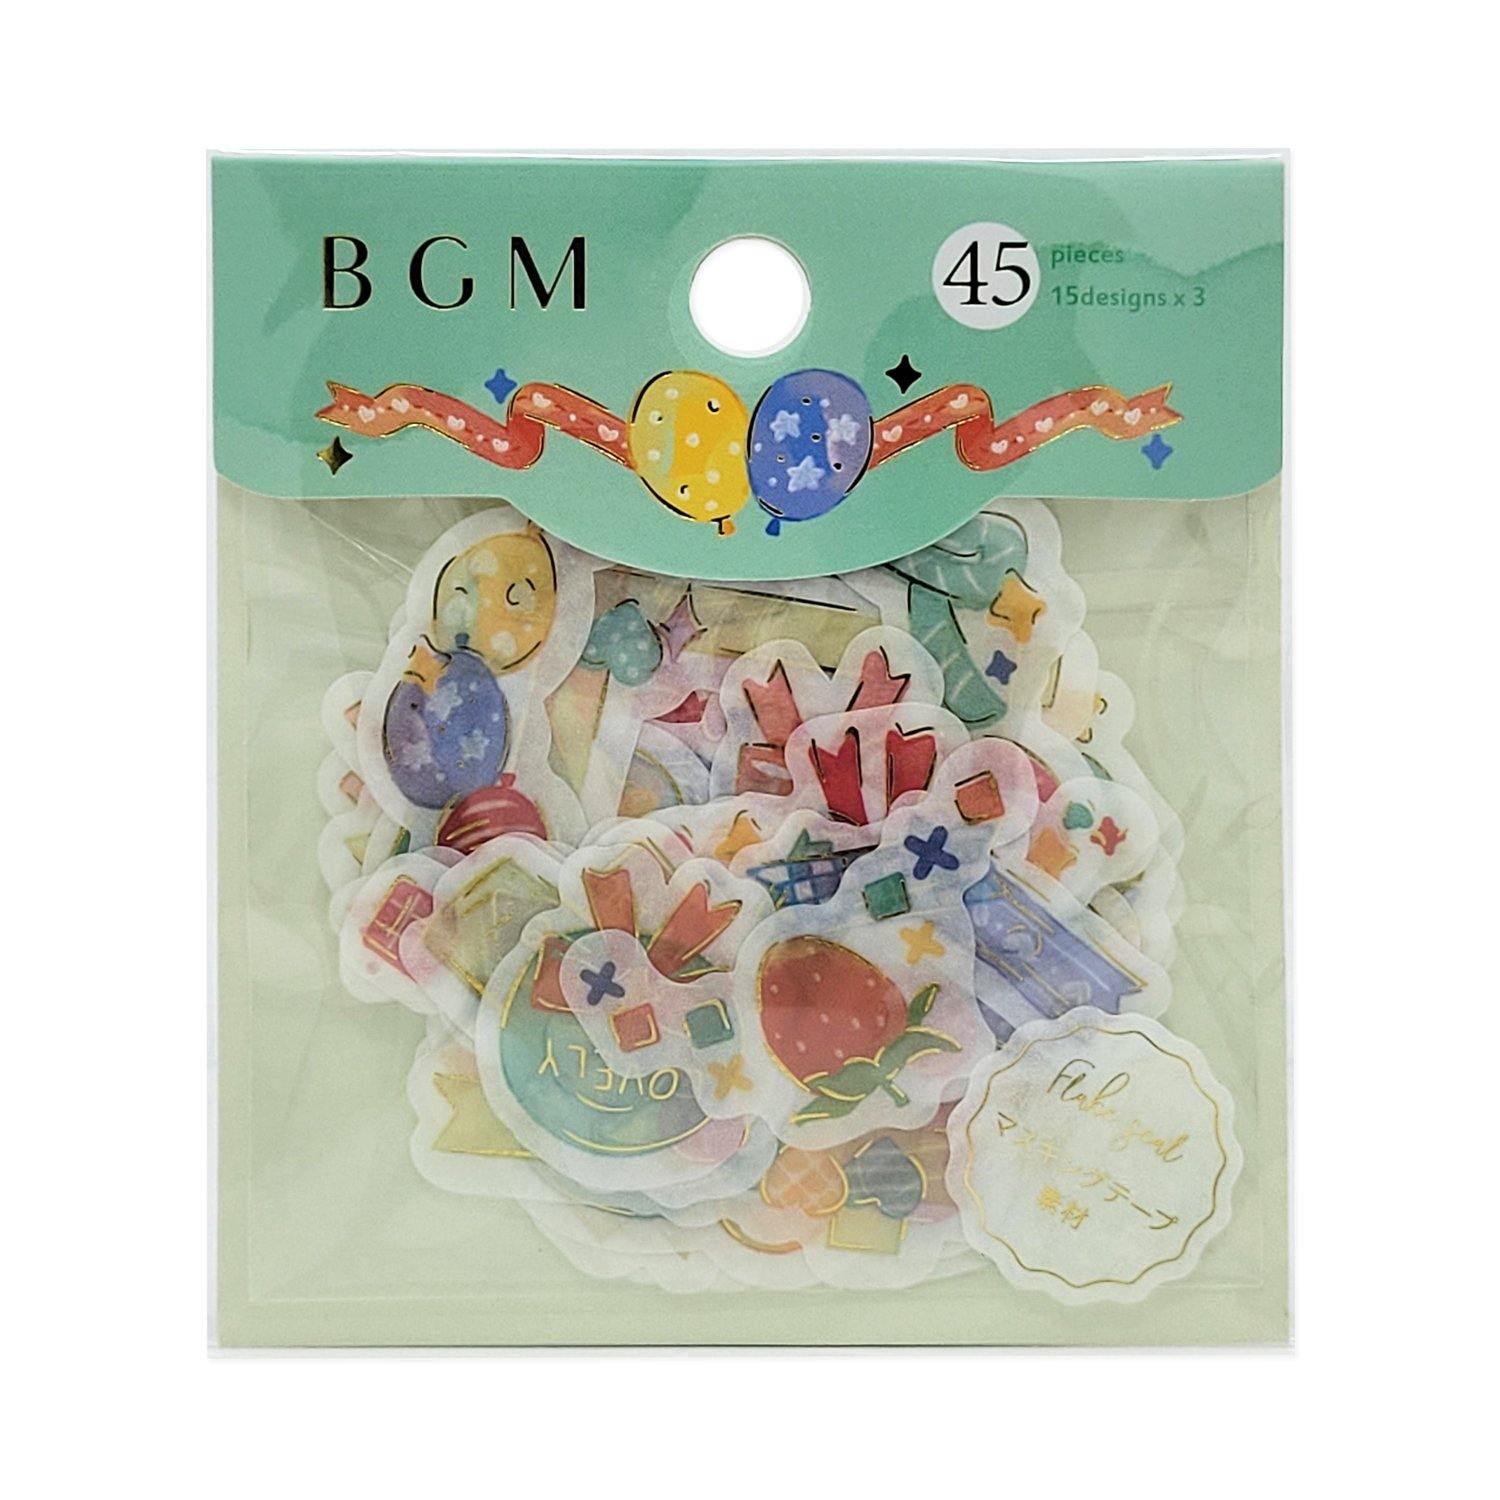 BGM Washi Sticker Flake SEAL Foil Stamping - Decoration Colorful Party | papermindstationery.com